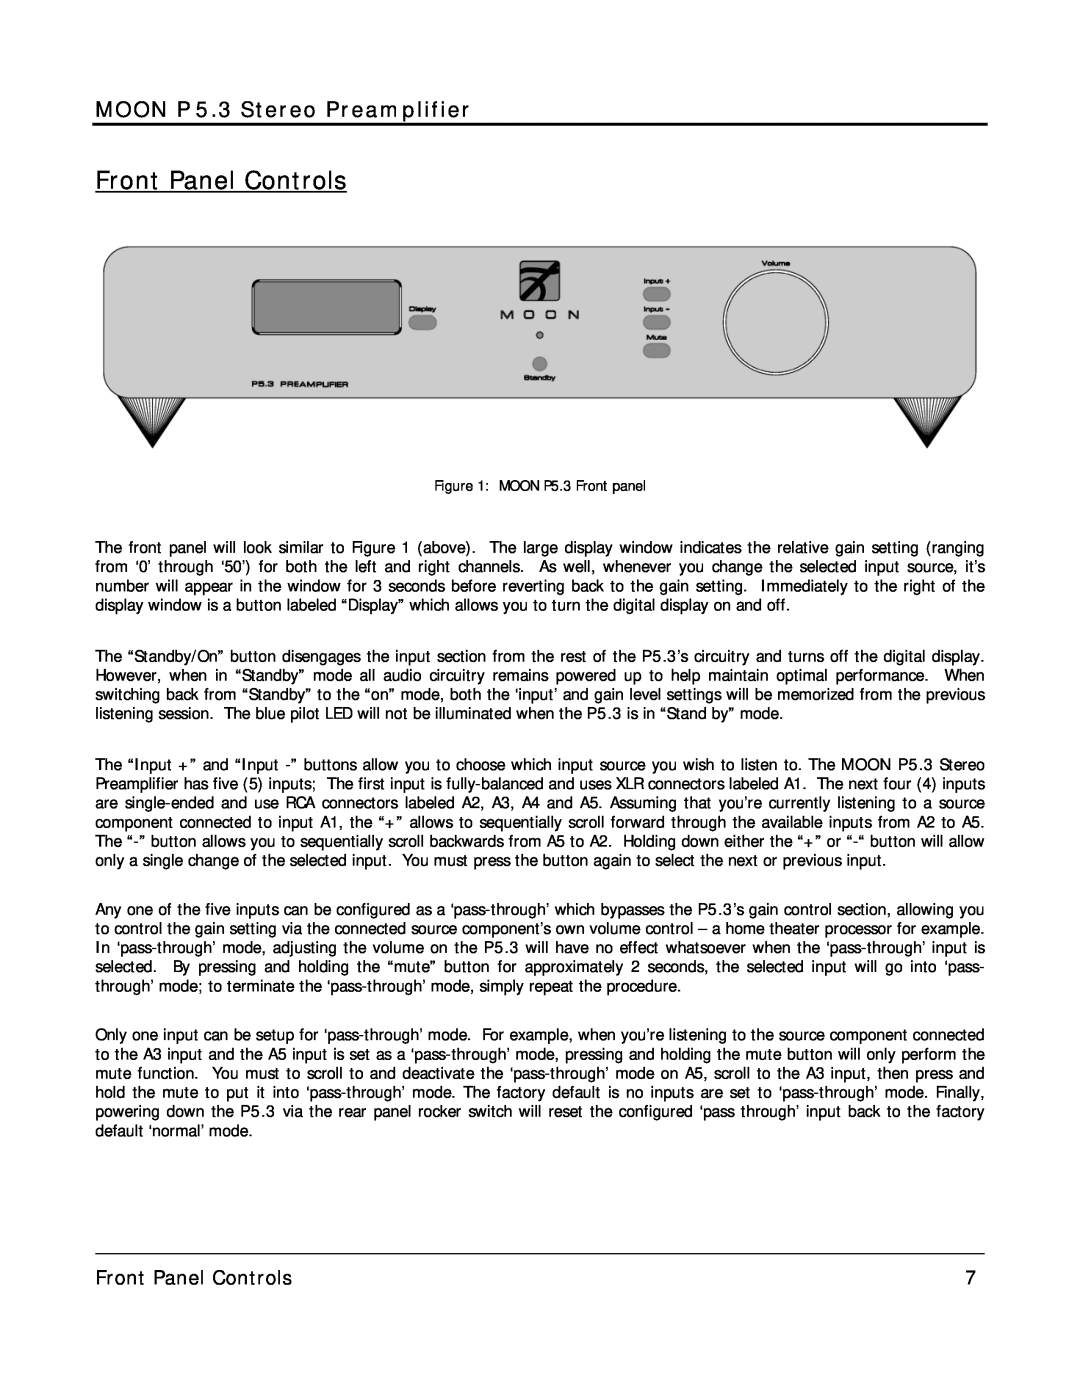 Simaudio owner manual Front Panel Controls, MOON P 5.3 Stereo Preamplifier, MOON P5.3 Front panel 